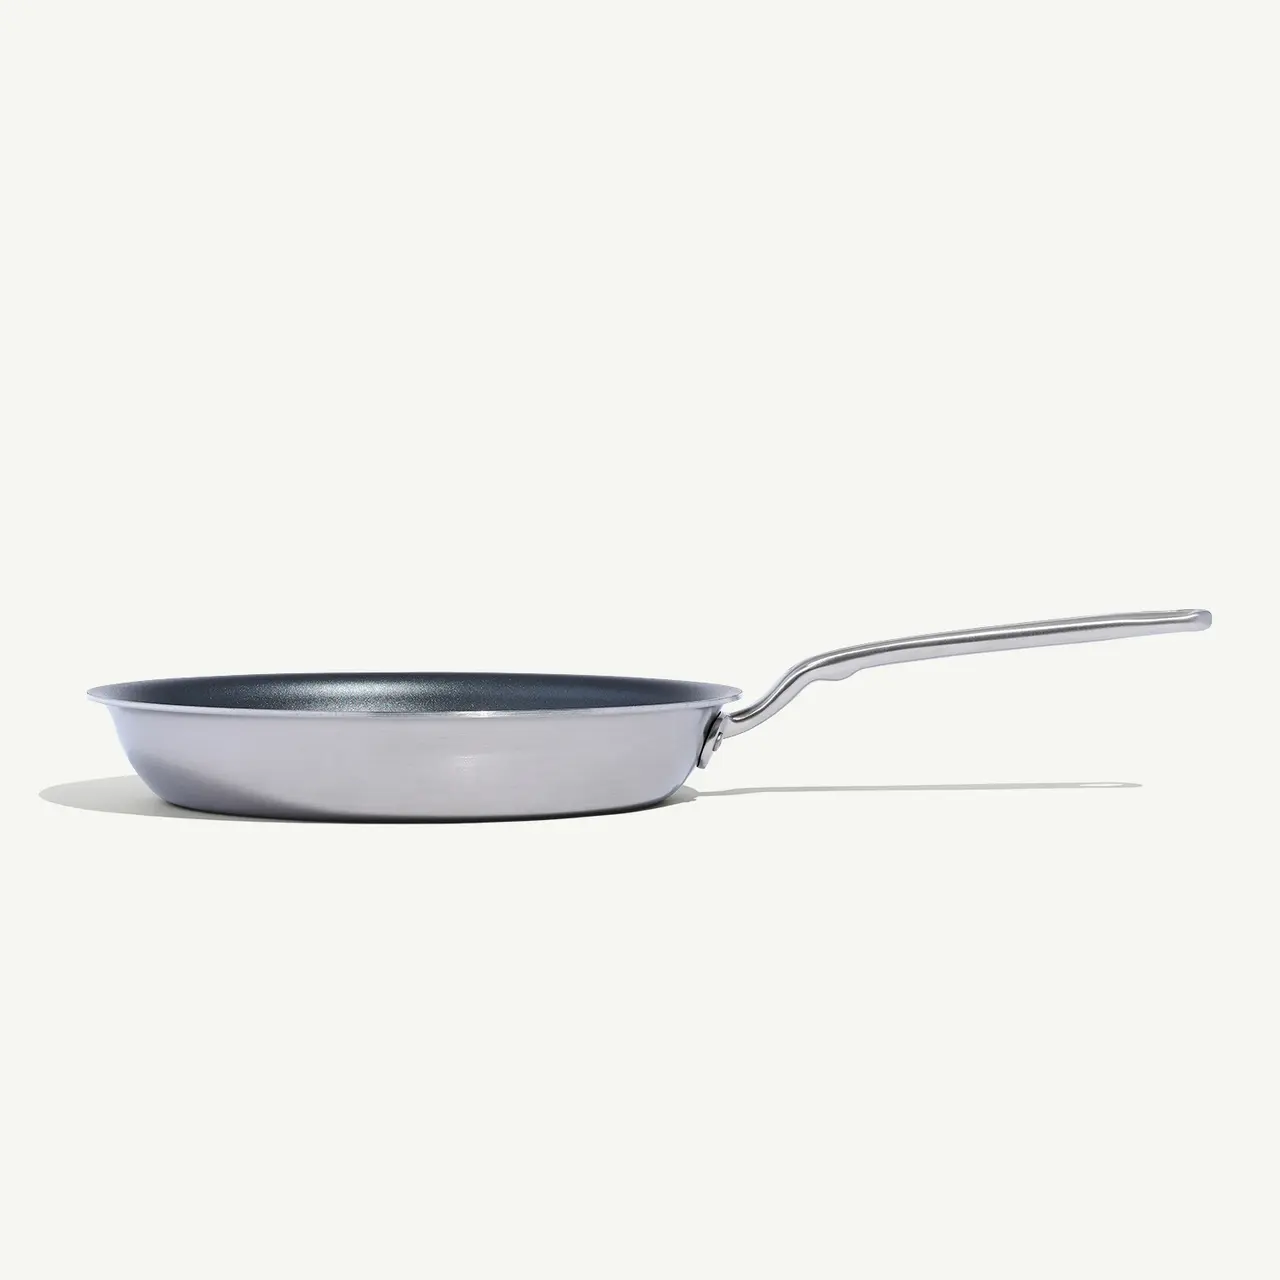 A side view of a frying pan with a long handle against a white background.